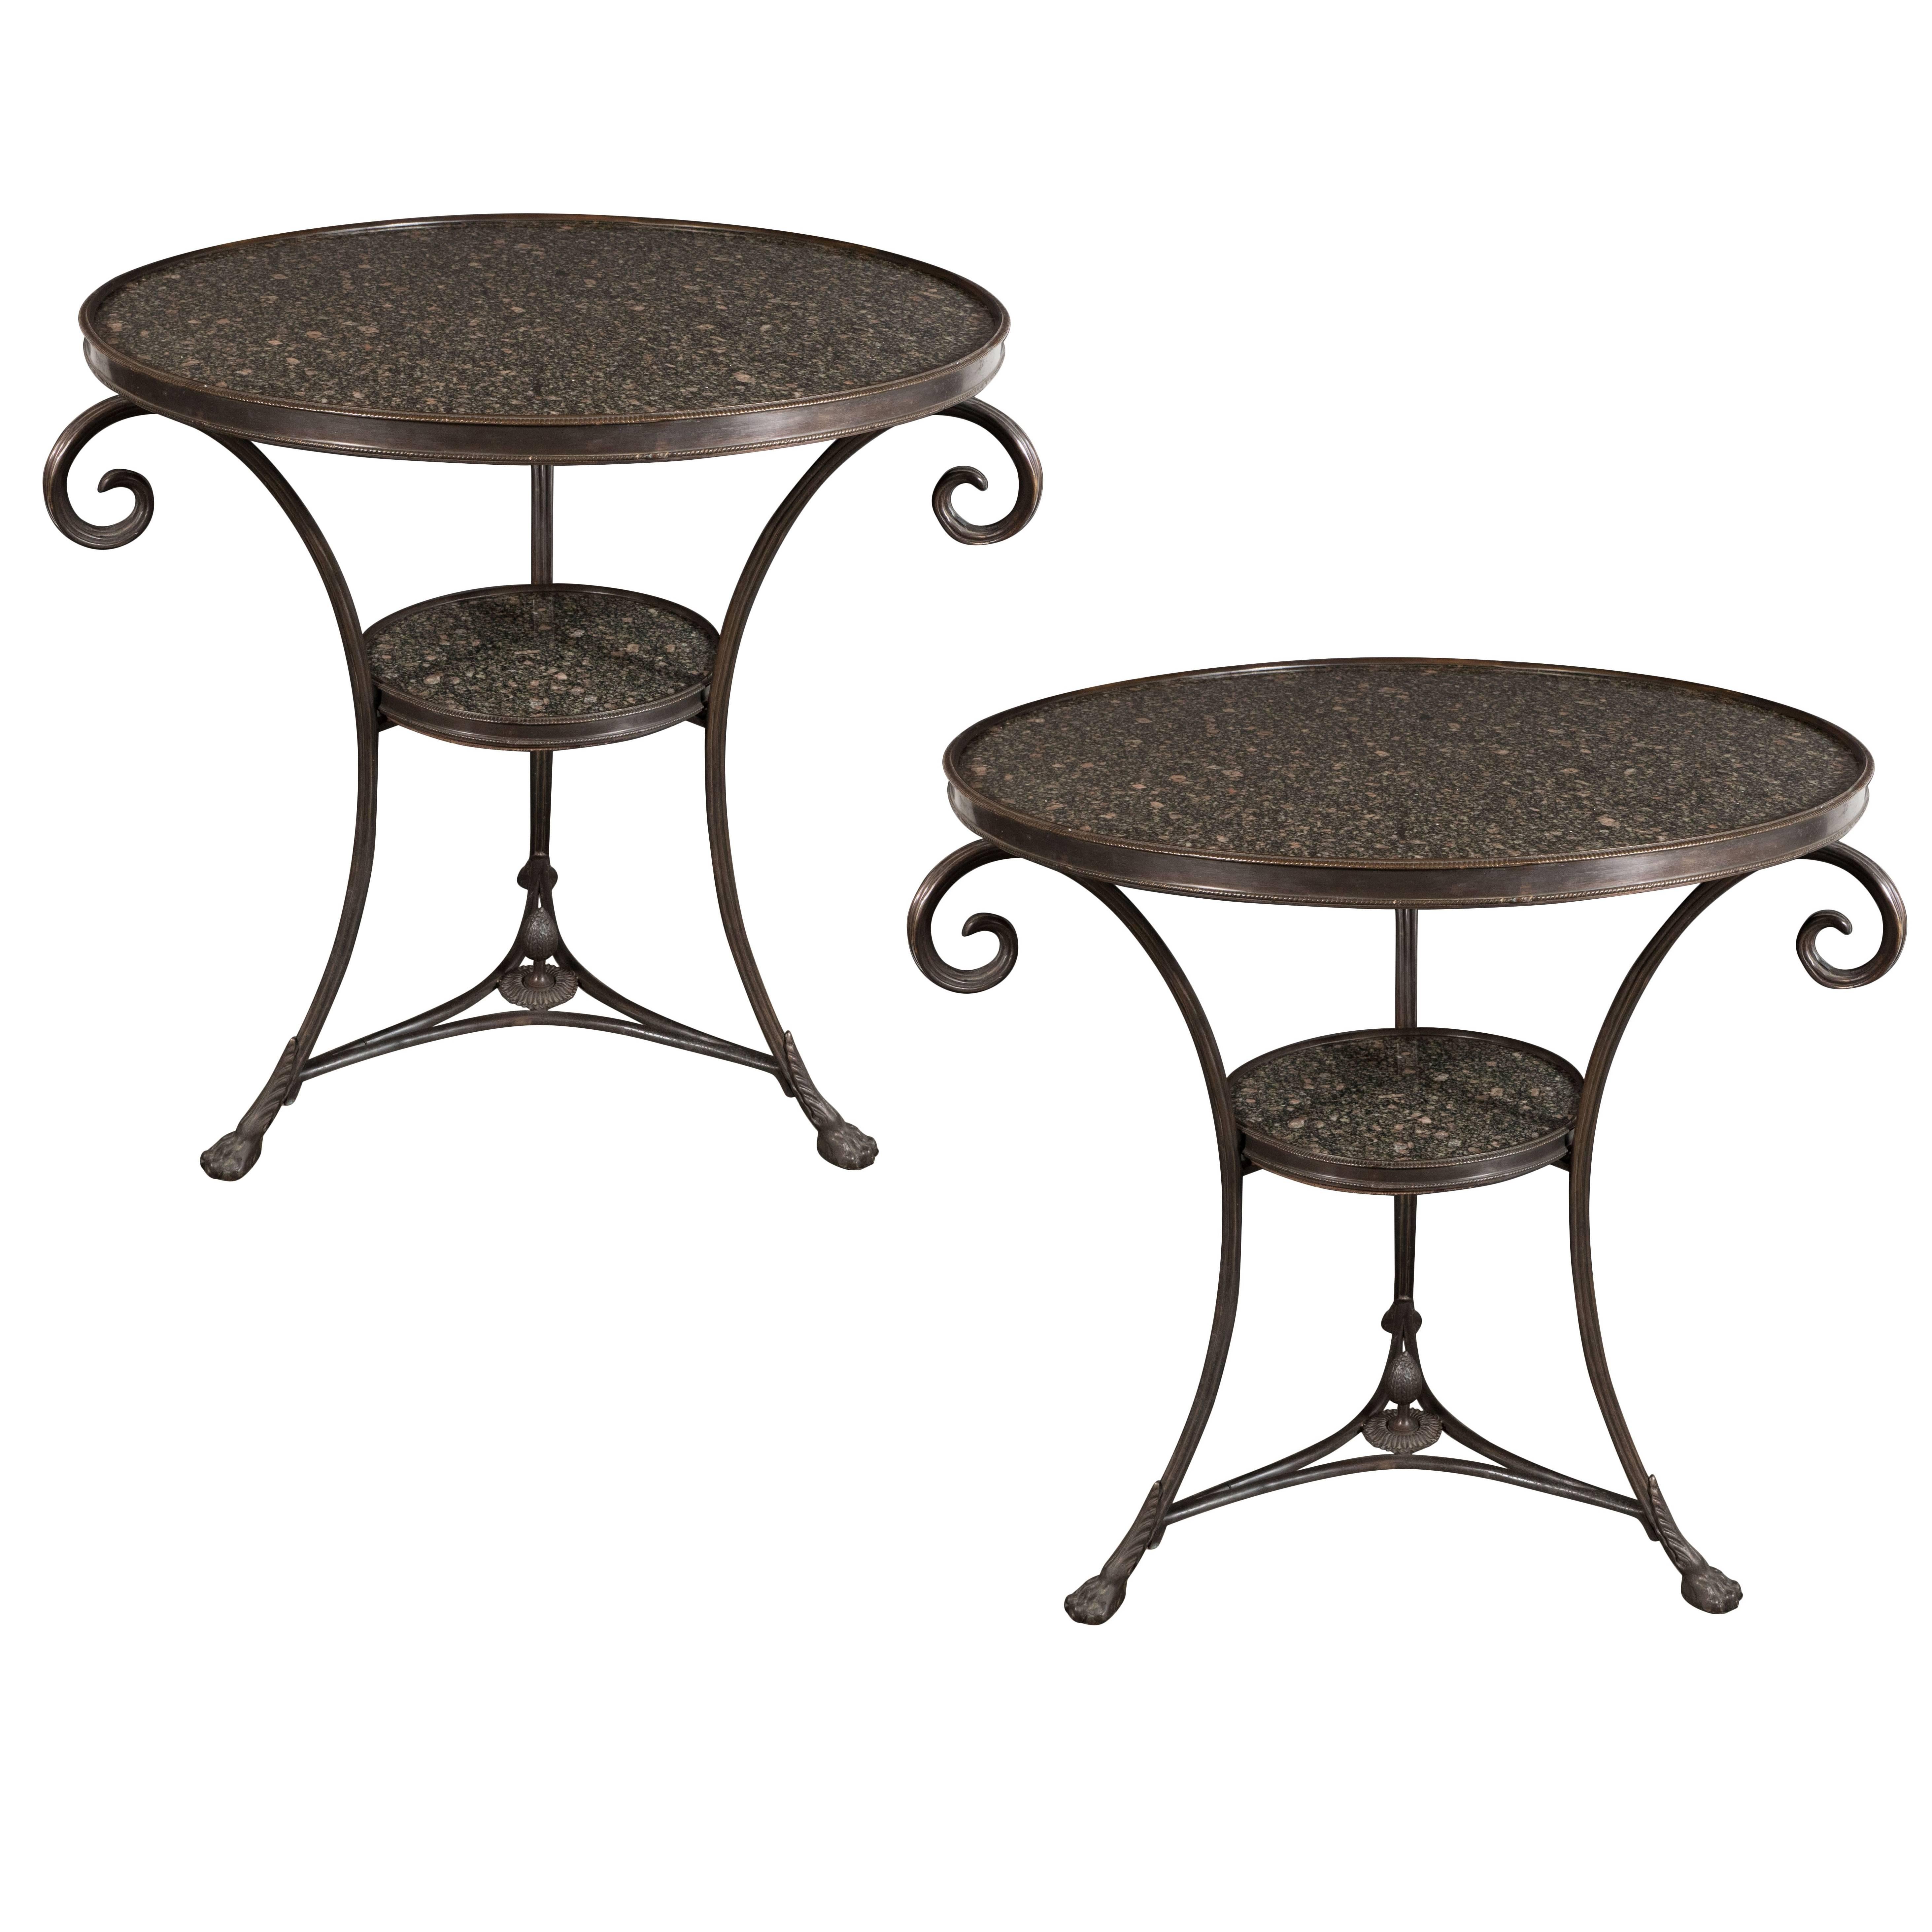 Pair of French Art Deco Directoire Style Bronze and Granite Gueridon Tables